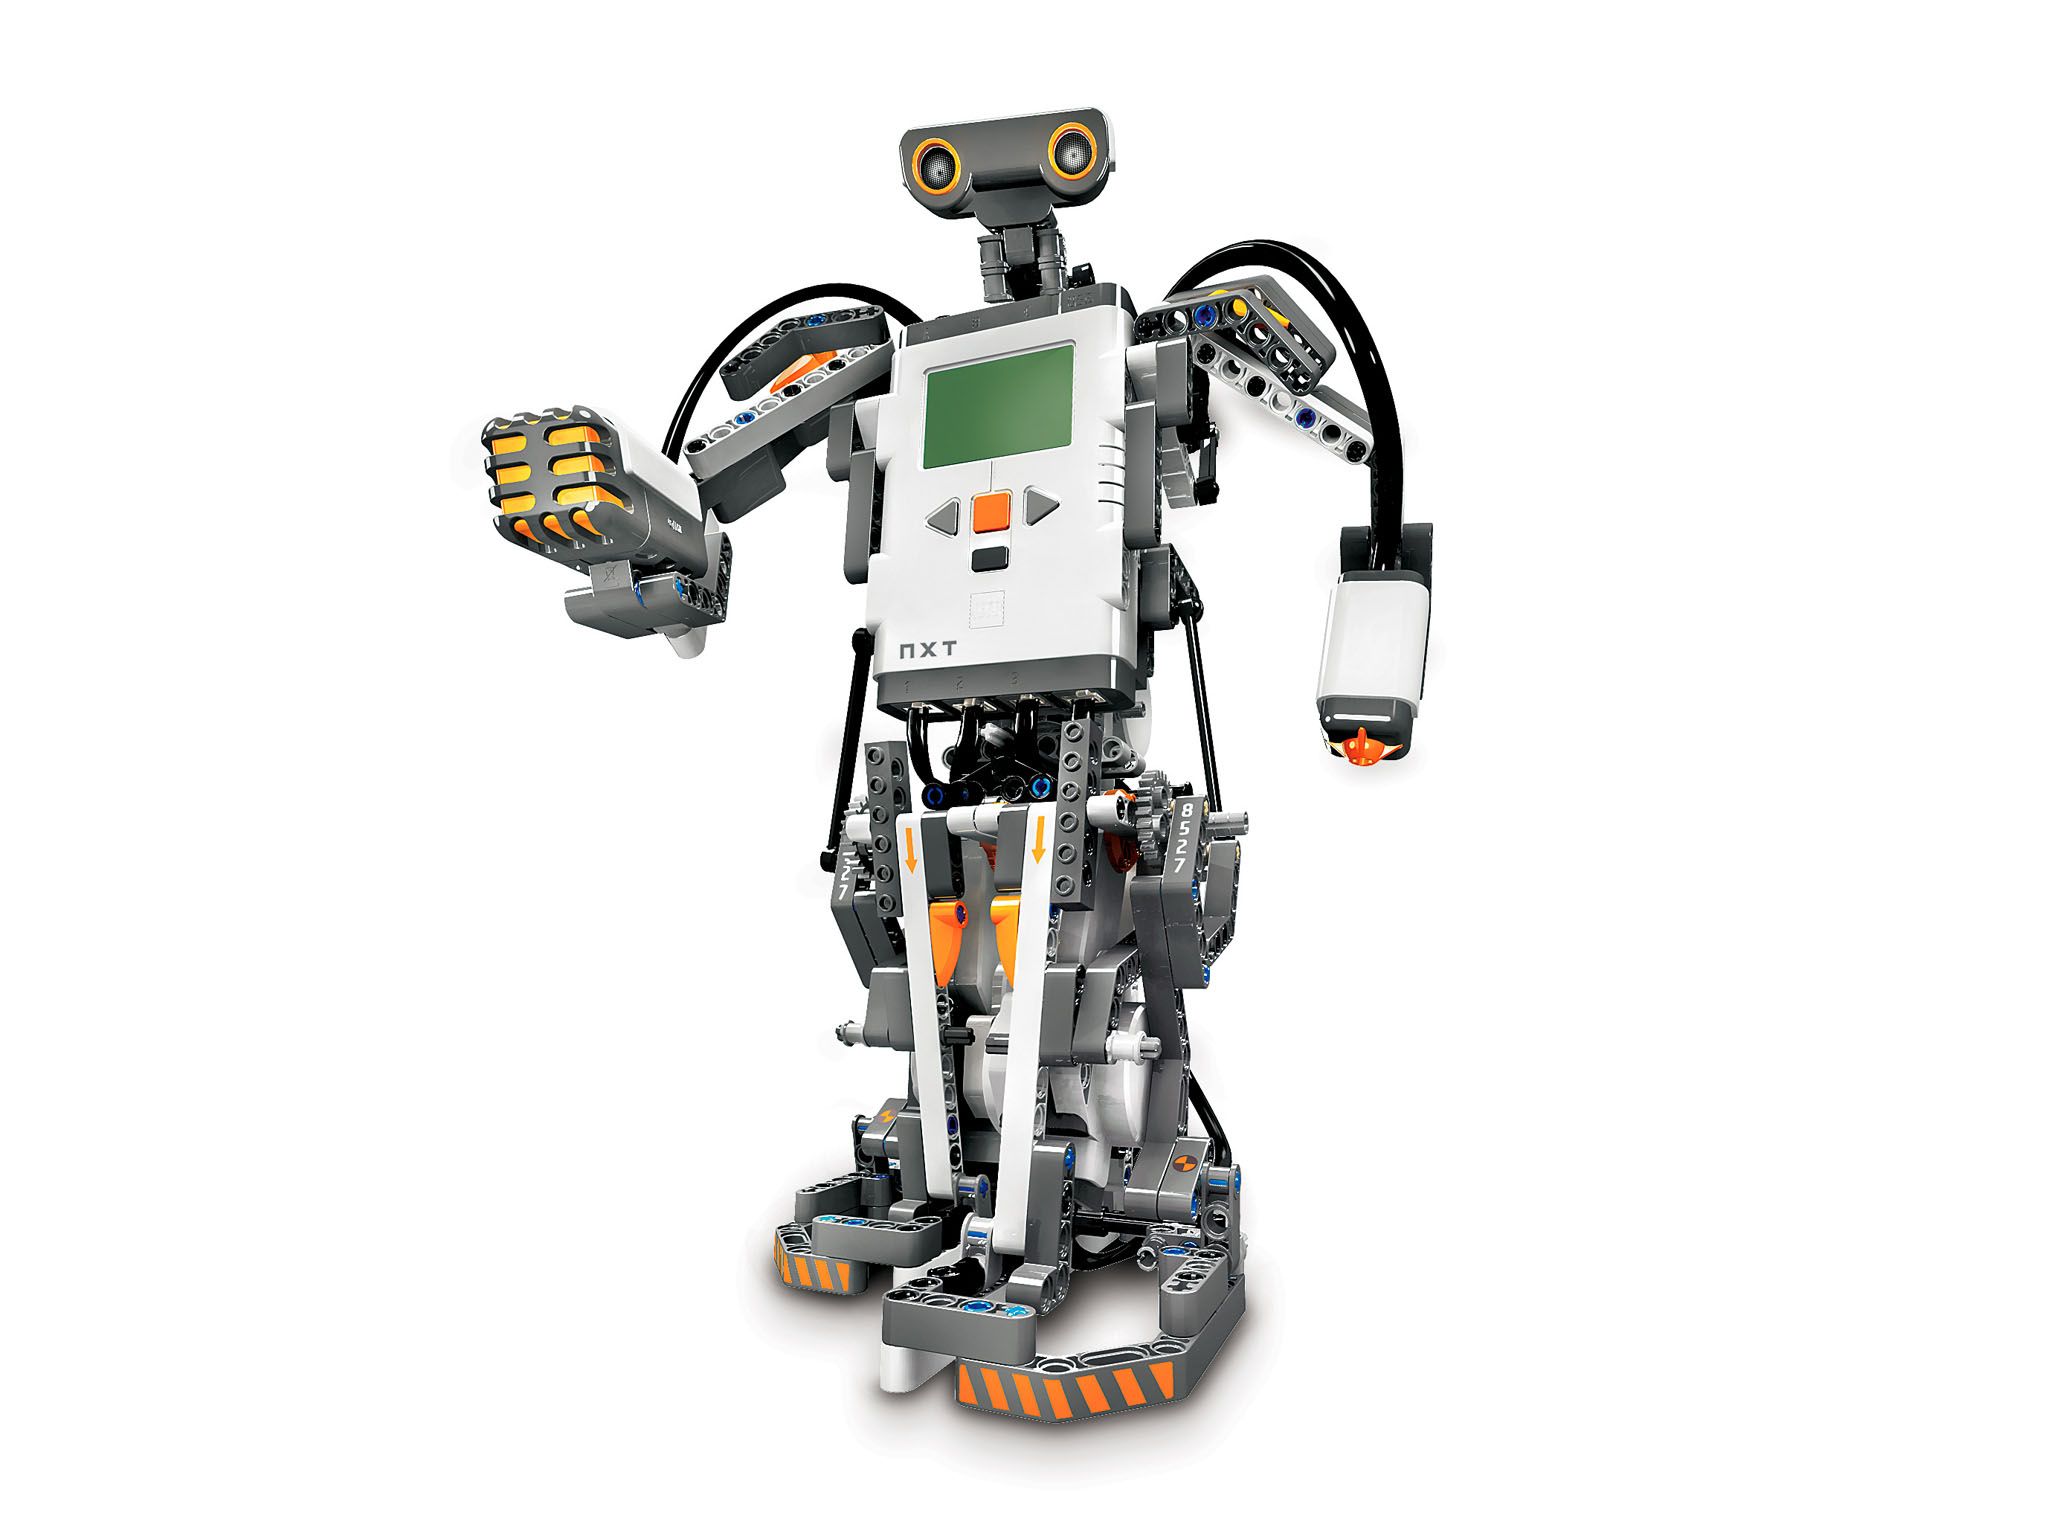 Lego Mindstorms NXT - ROBOTS: Your Guide to the World of Robotics